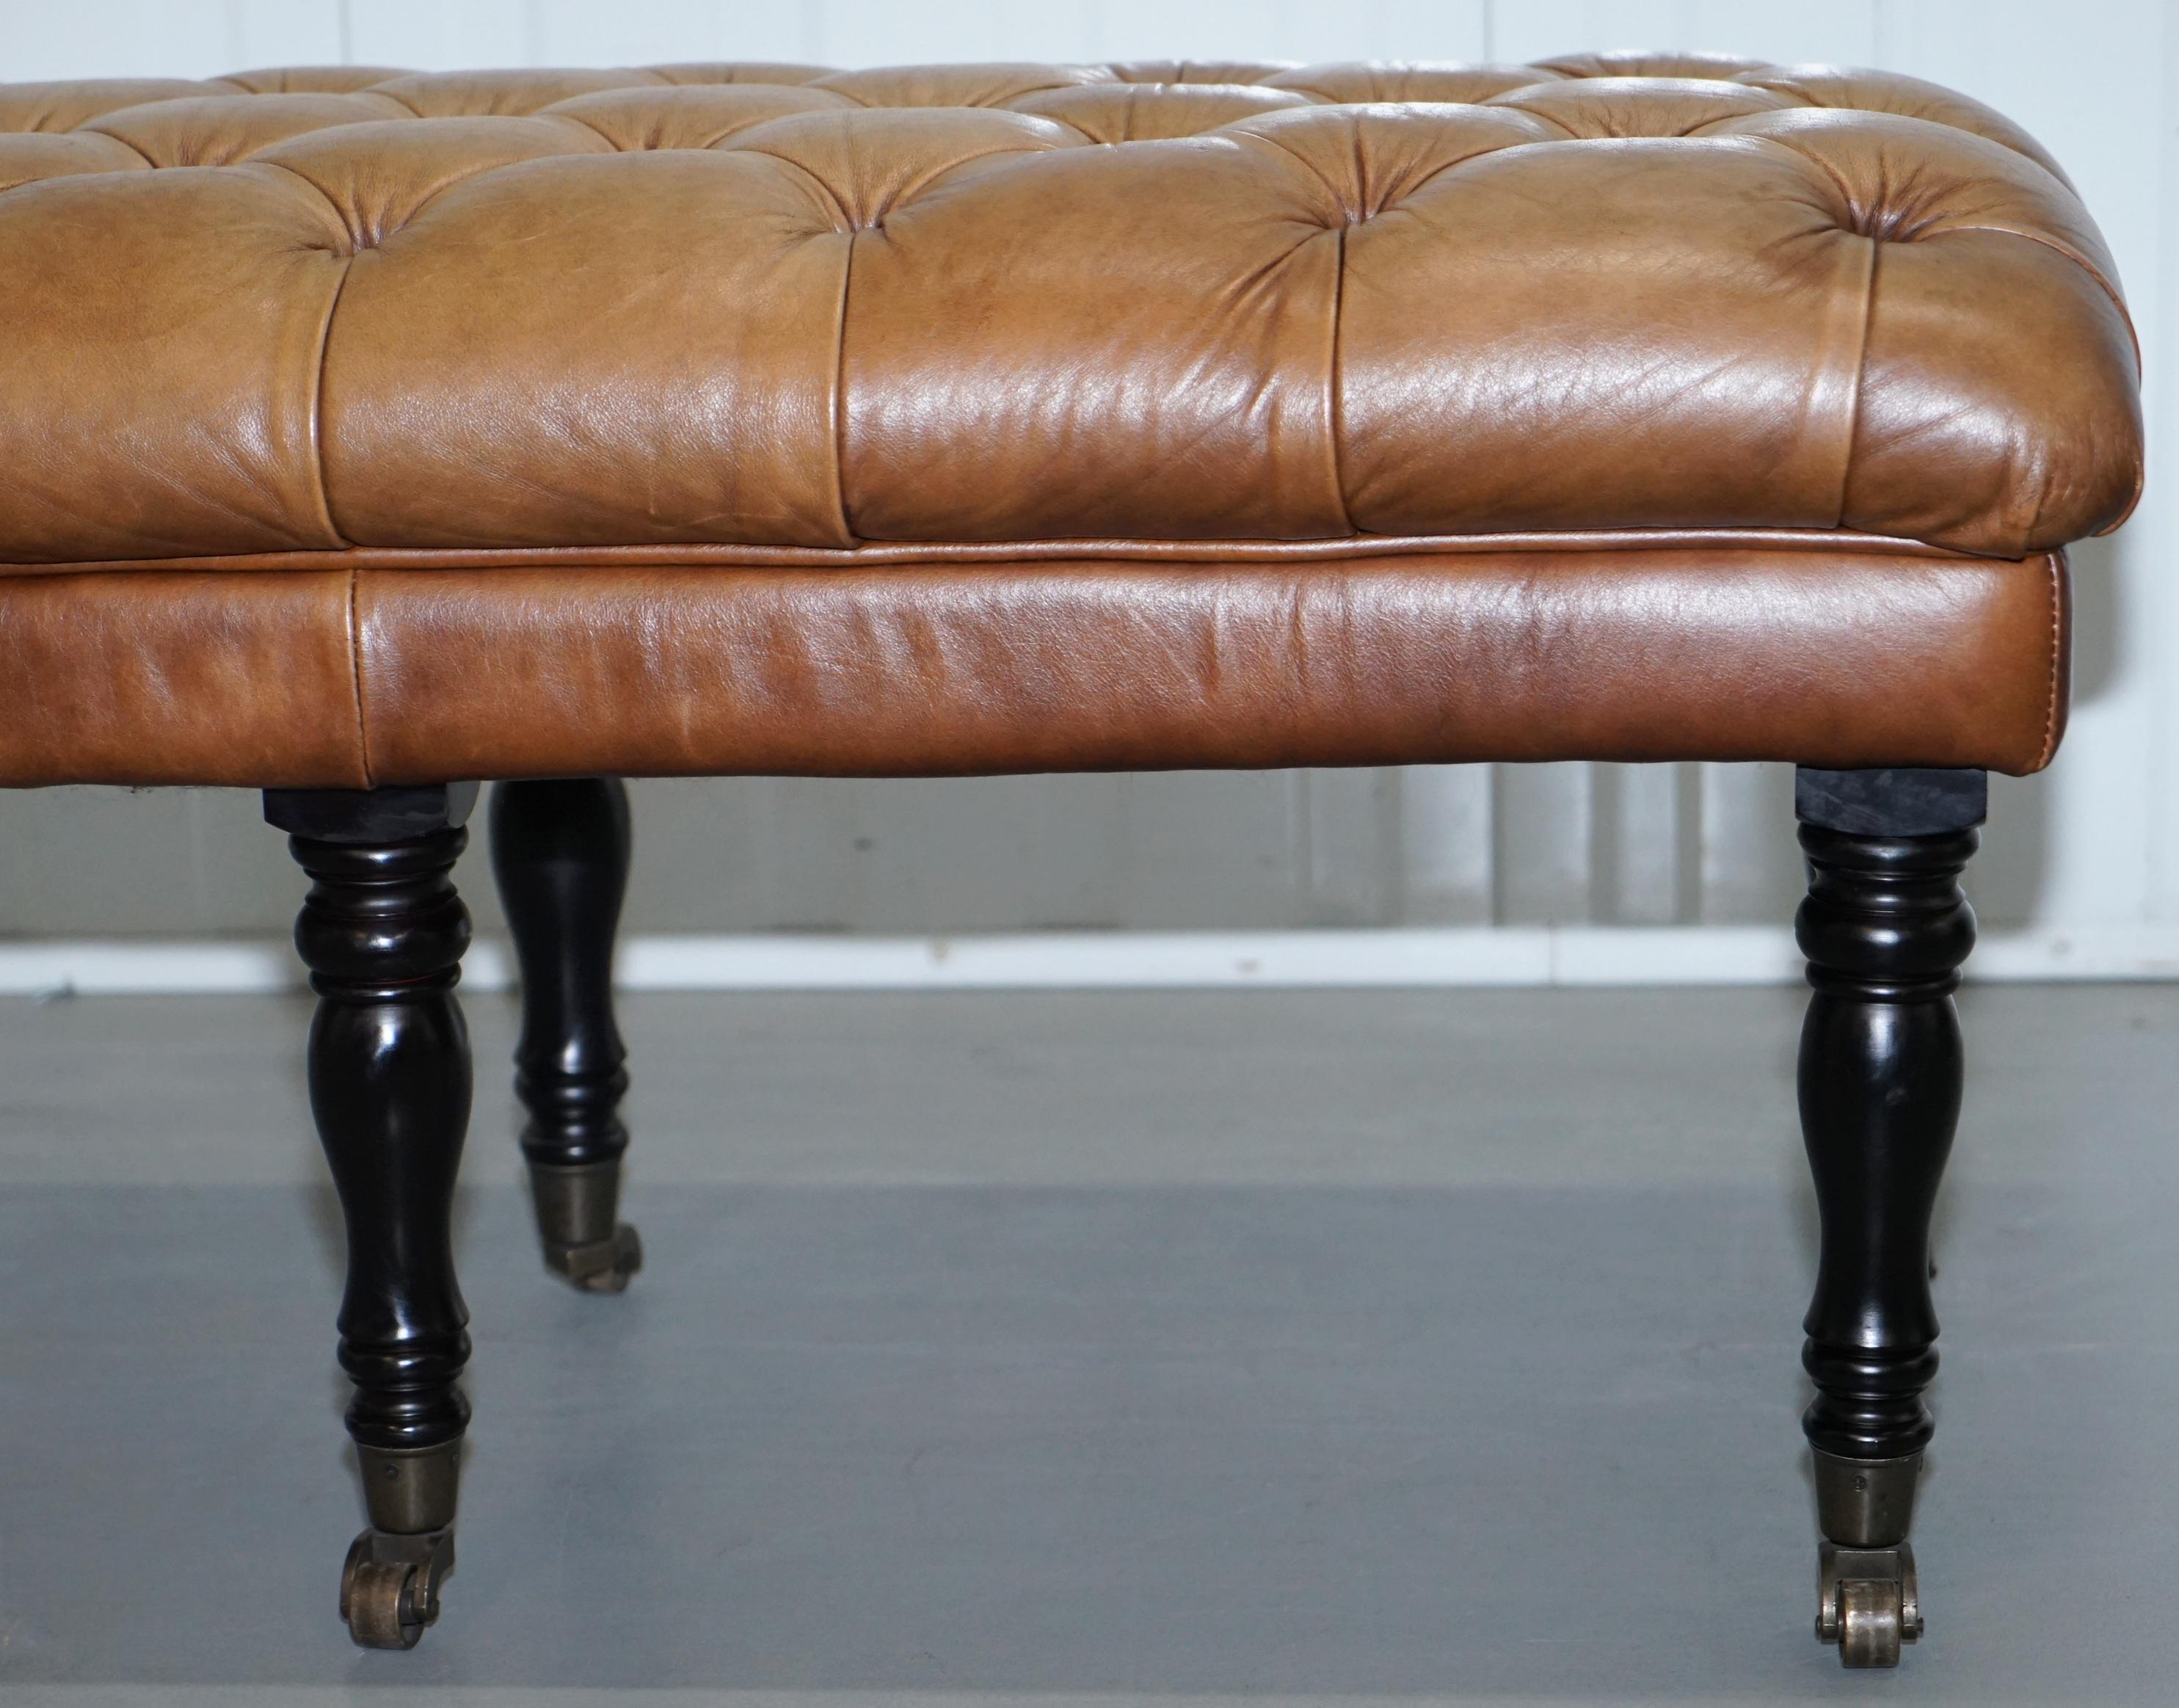 Chesterfield Aged Tan Brown Leather Chesterfield Bench Stool on Wood Turned Legs 1